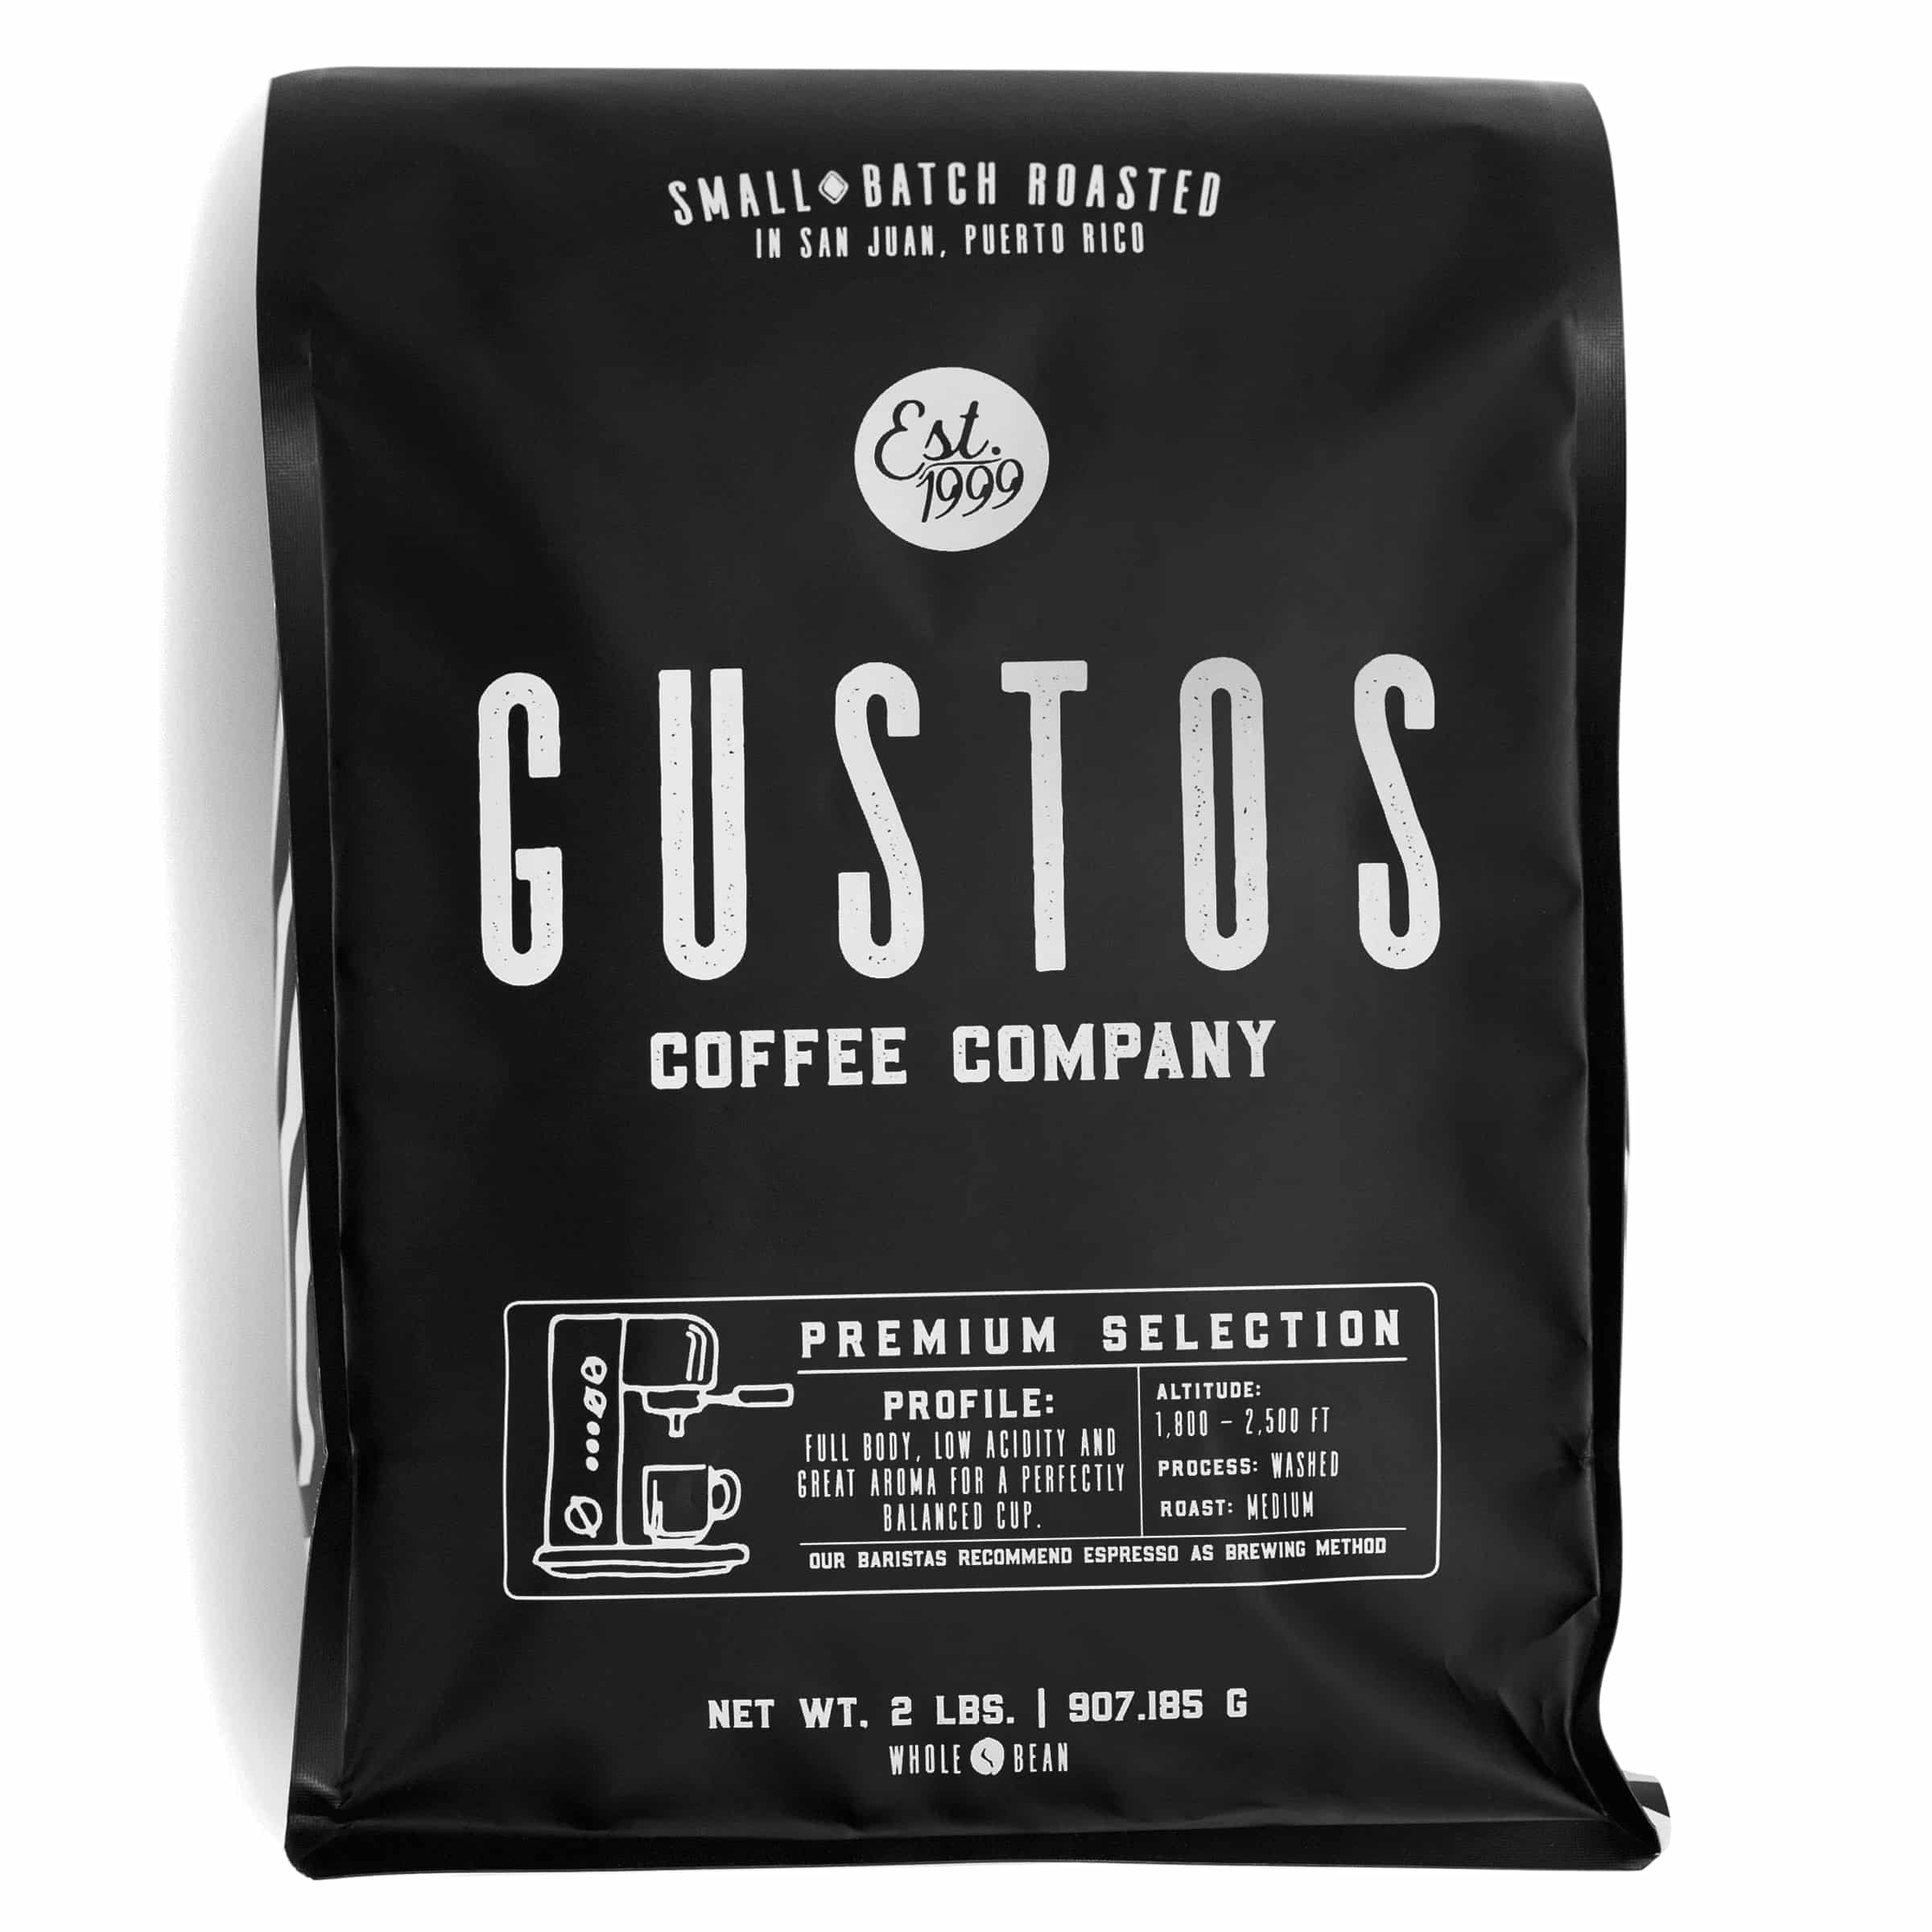 2lb bag of Premium Gourmet Coffee of the Vatican, popes and Kings Yauco PR by Gustos Coffee Co